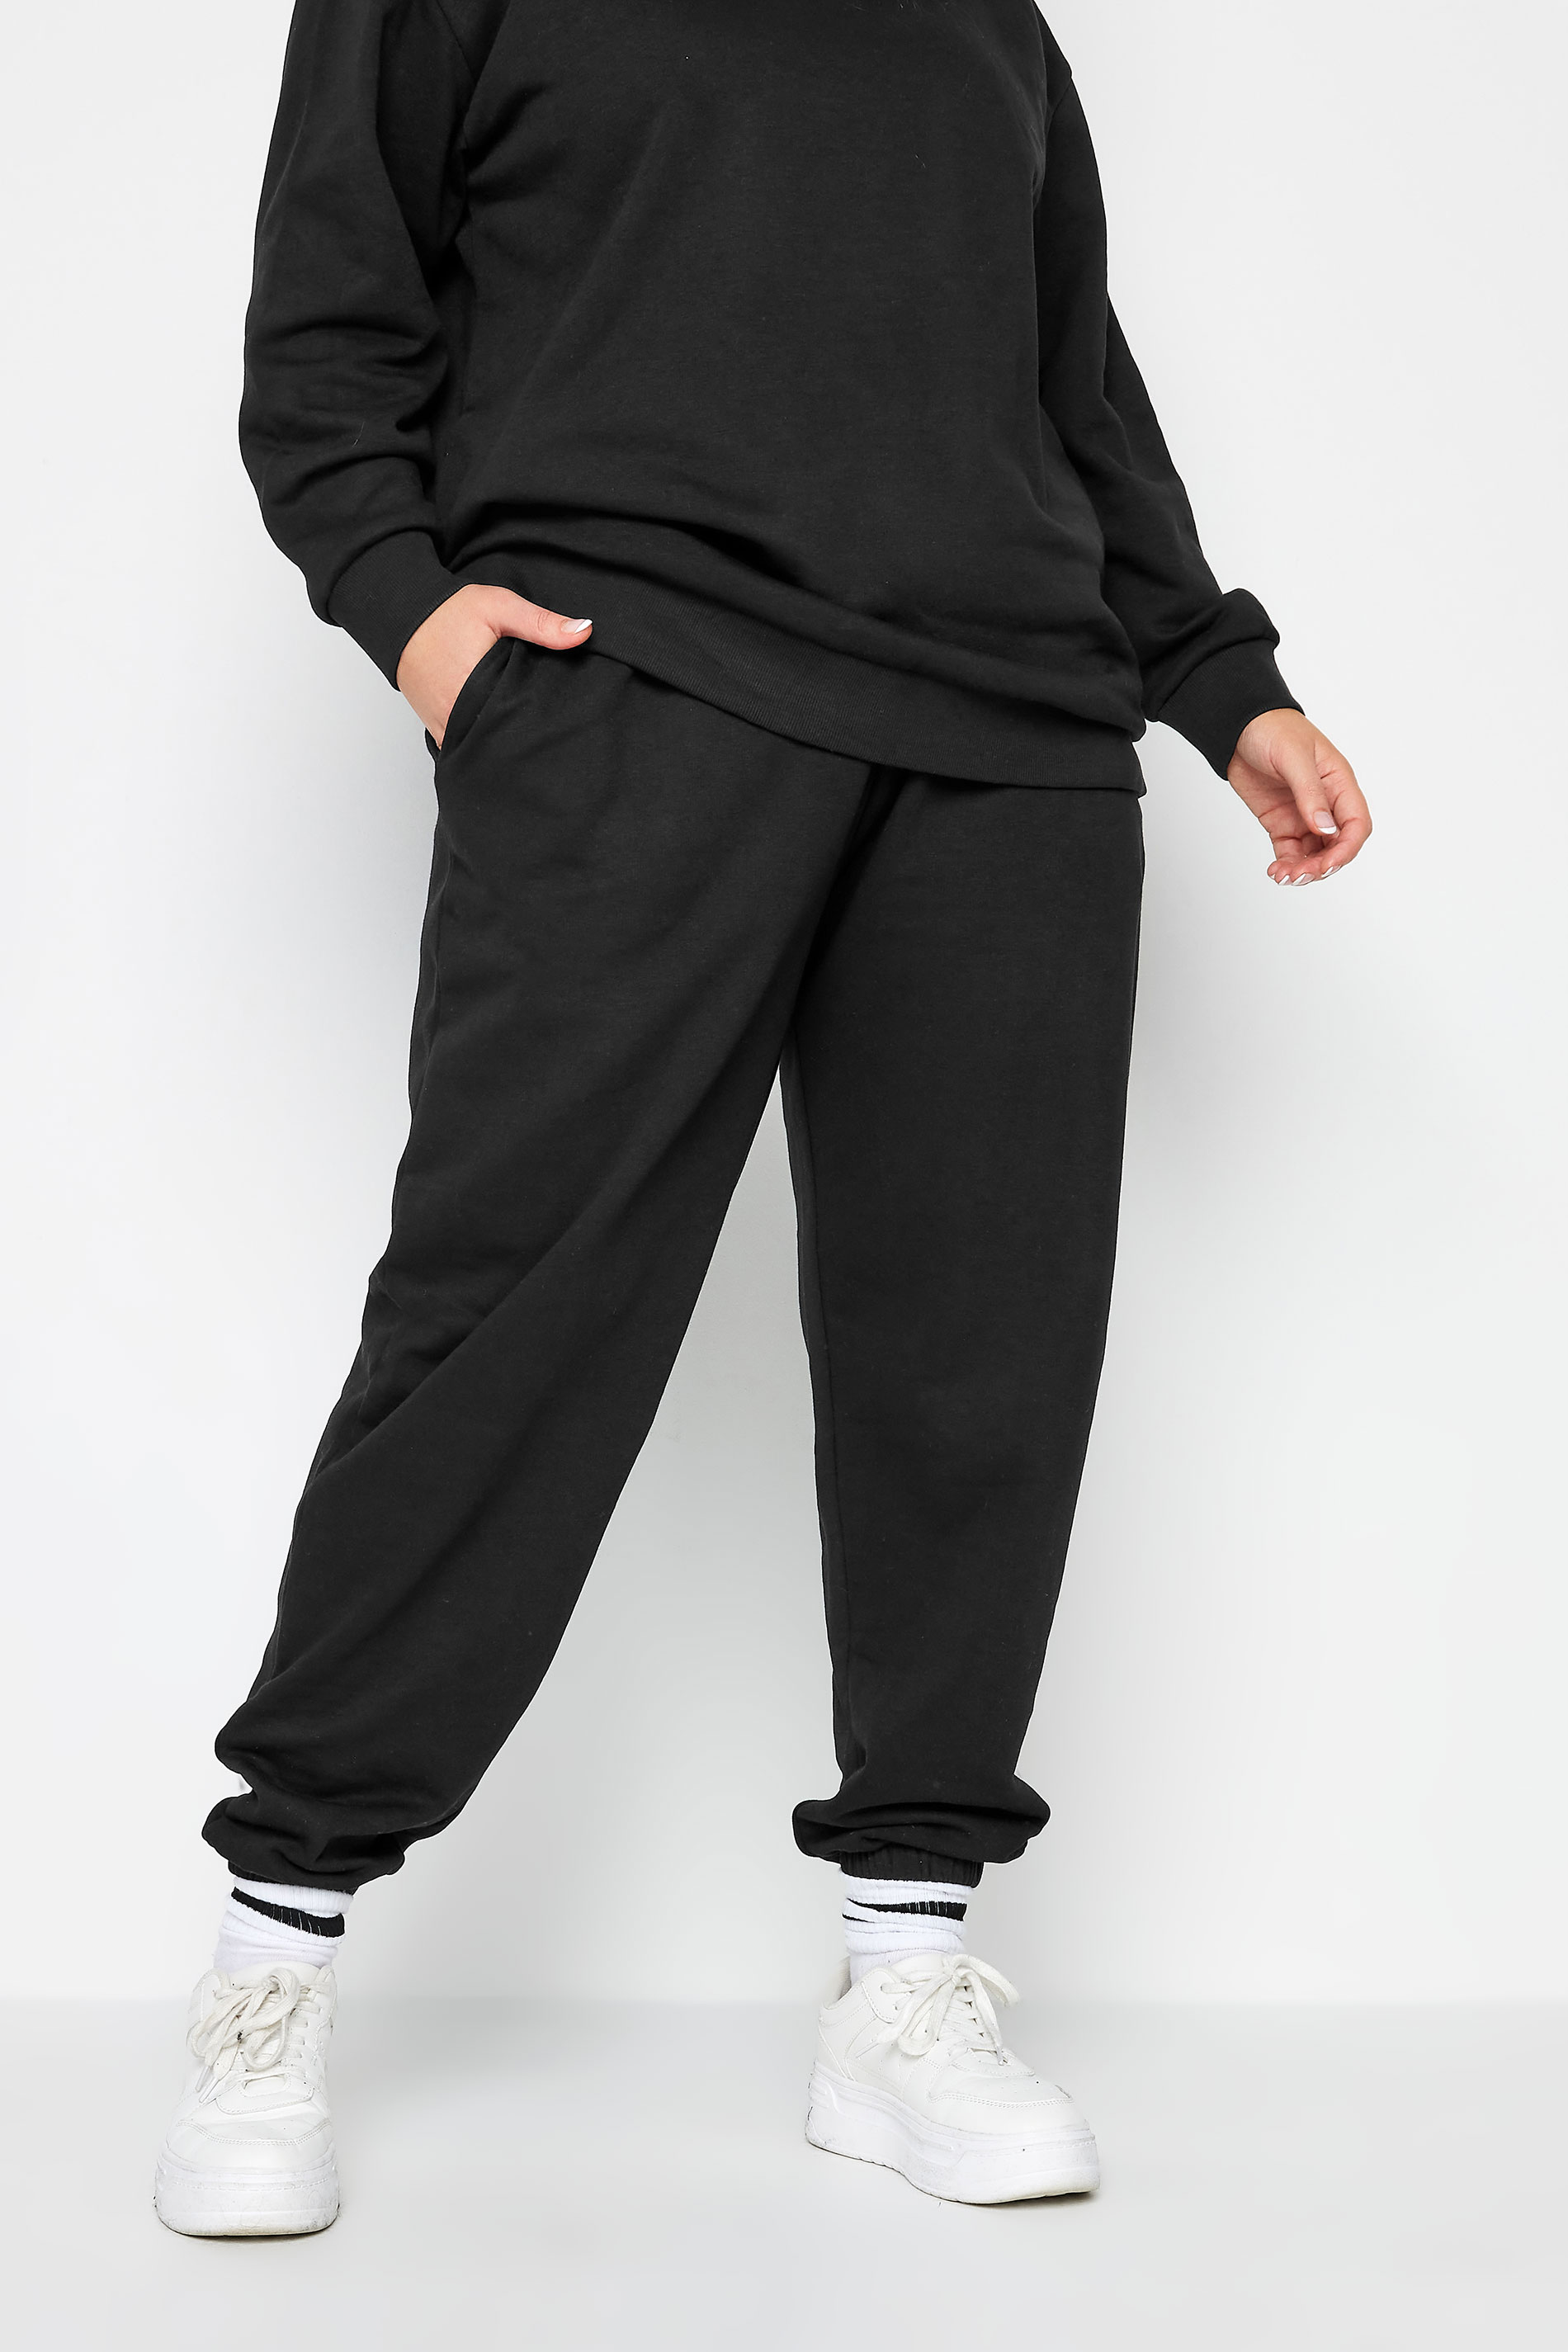 YOURS Curve Black Cuffed Joggers | Yours Clothing 1